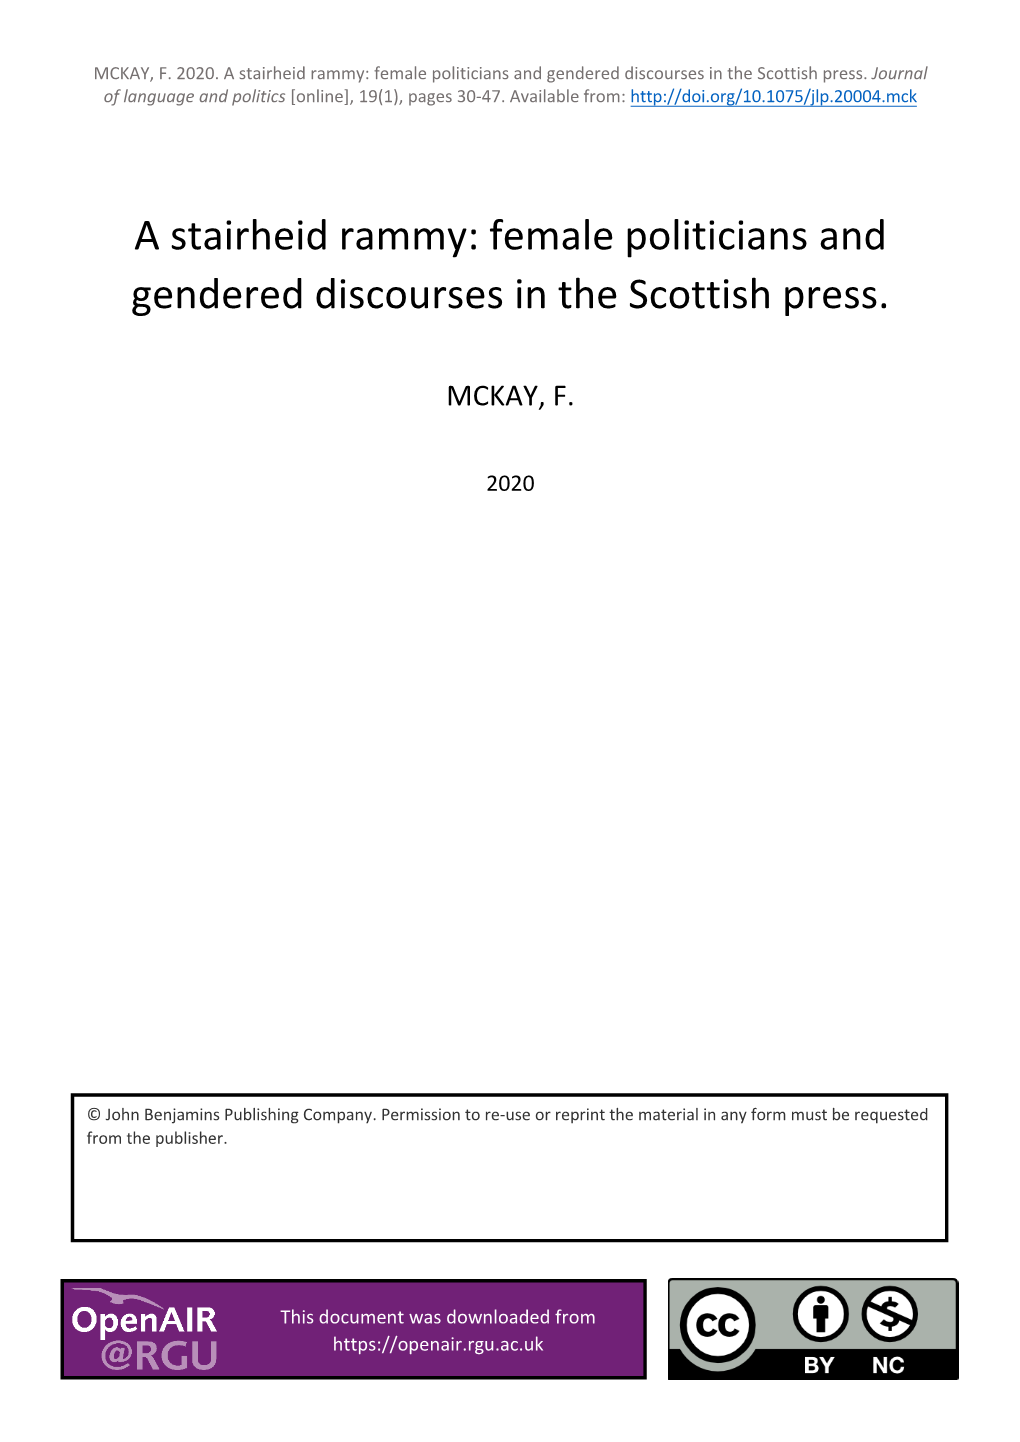 A Stairheid Rammy: Female Politicians and Gendered Discourses in the Scottish Press